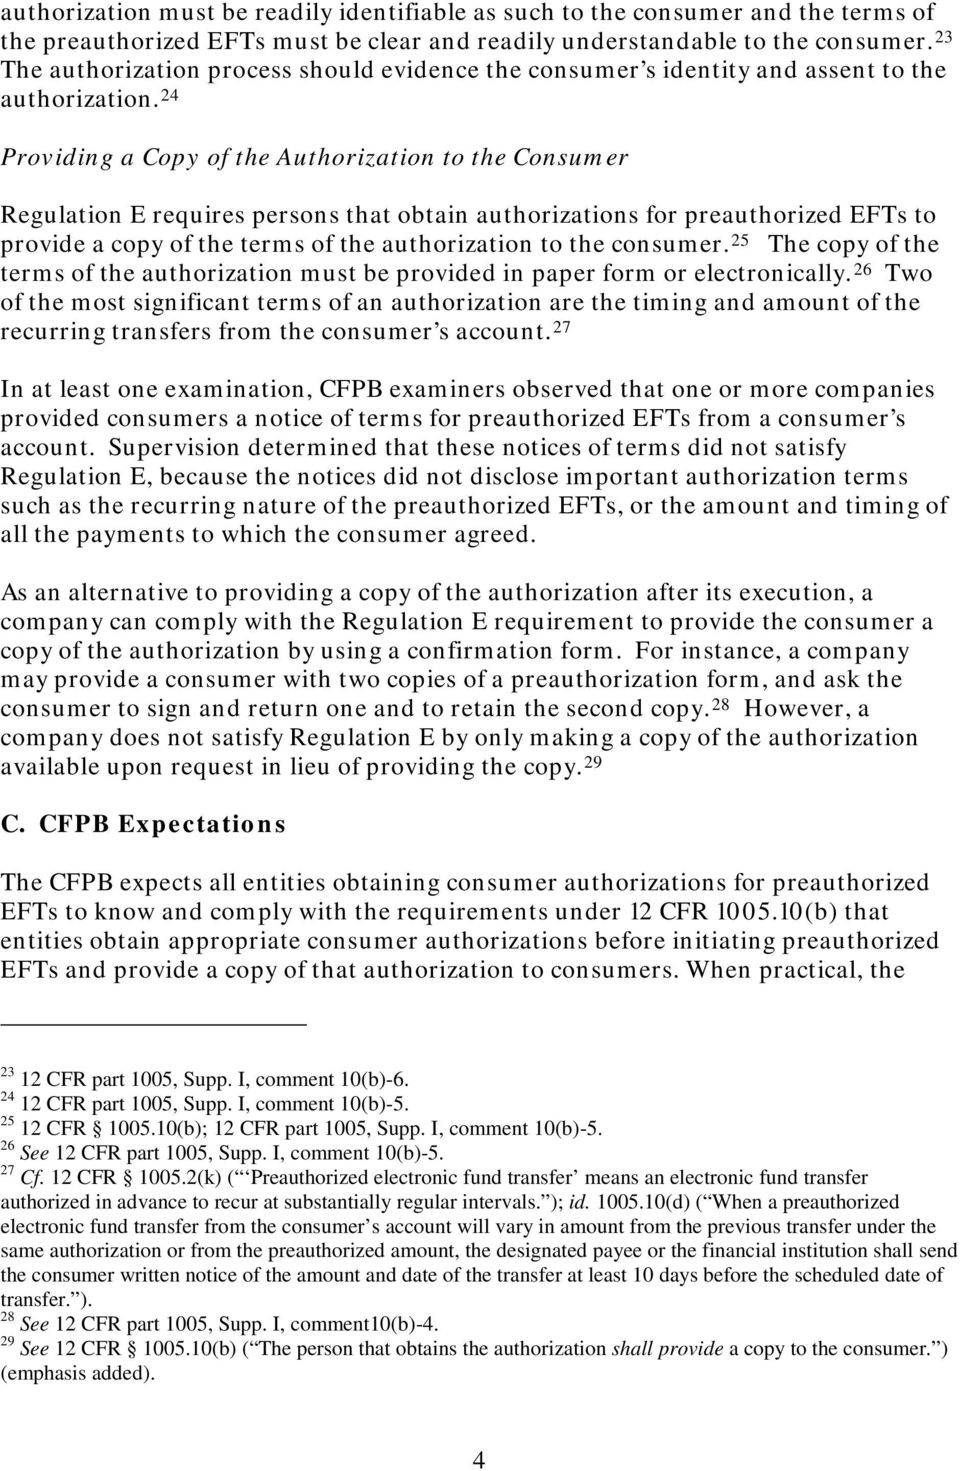 24 Providing a Copy of the Authorization to the Consumer Regulation E requires persons that obtain authorizations for preauthorized EFTs to provide a copy of the terms of the authorization to the